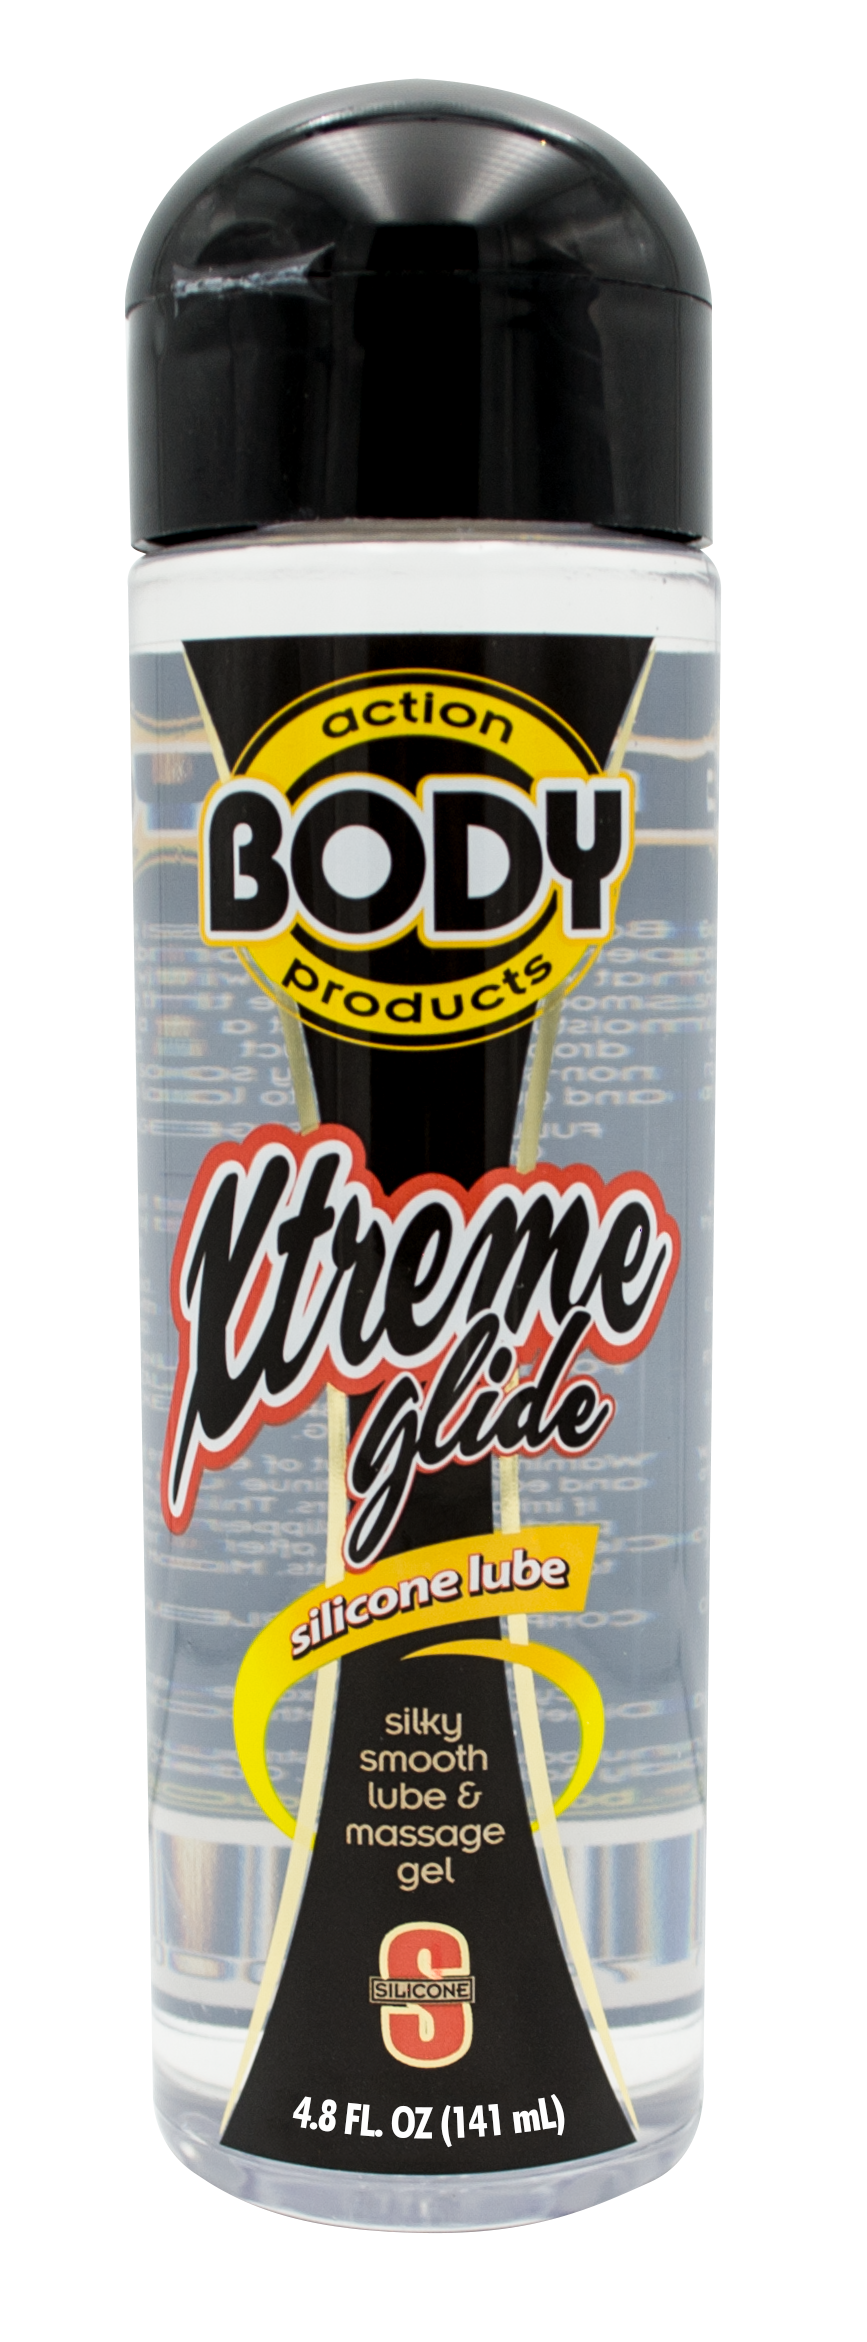 Body Action Xtreme Glide - Silicone Lube